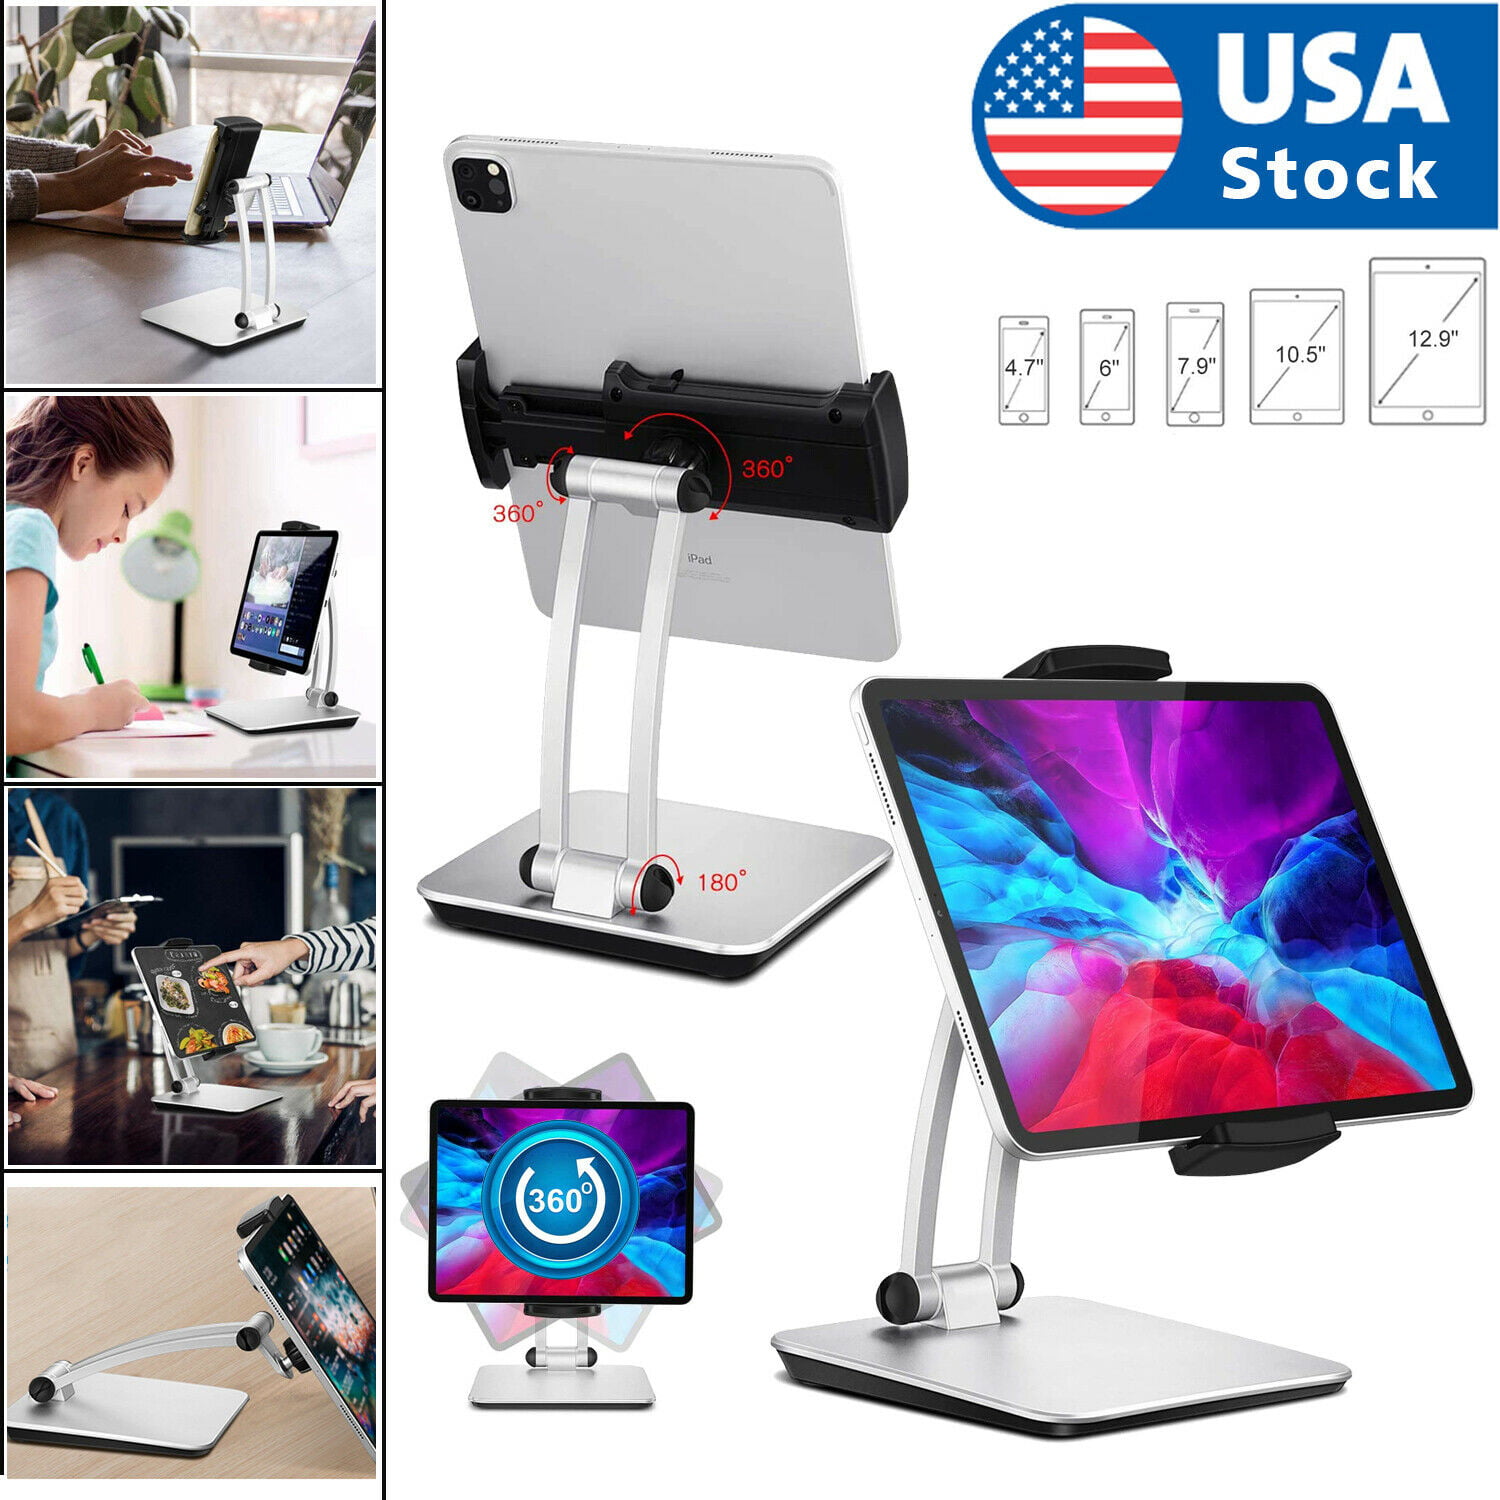 Adjustable and Foldable Holder Fit for iPad iPhone Cellphone Tablet Kindle in Bedroom Kitchen Floor Aluminum KALDOREI Tablet Phone Stand for Bed Sofa Desk 